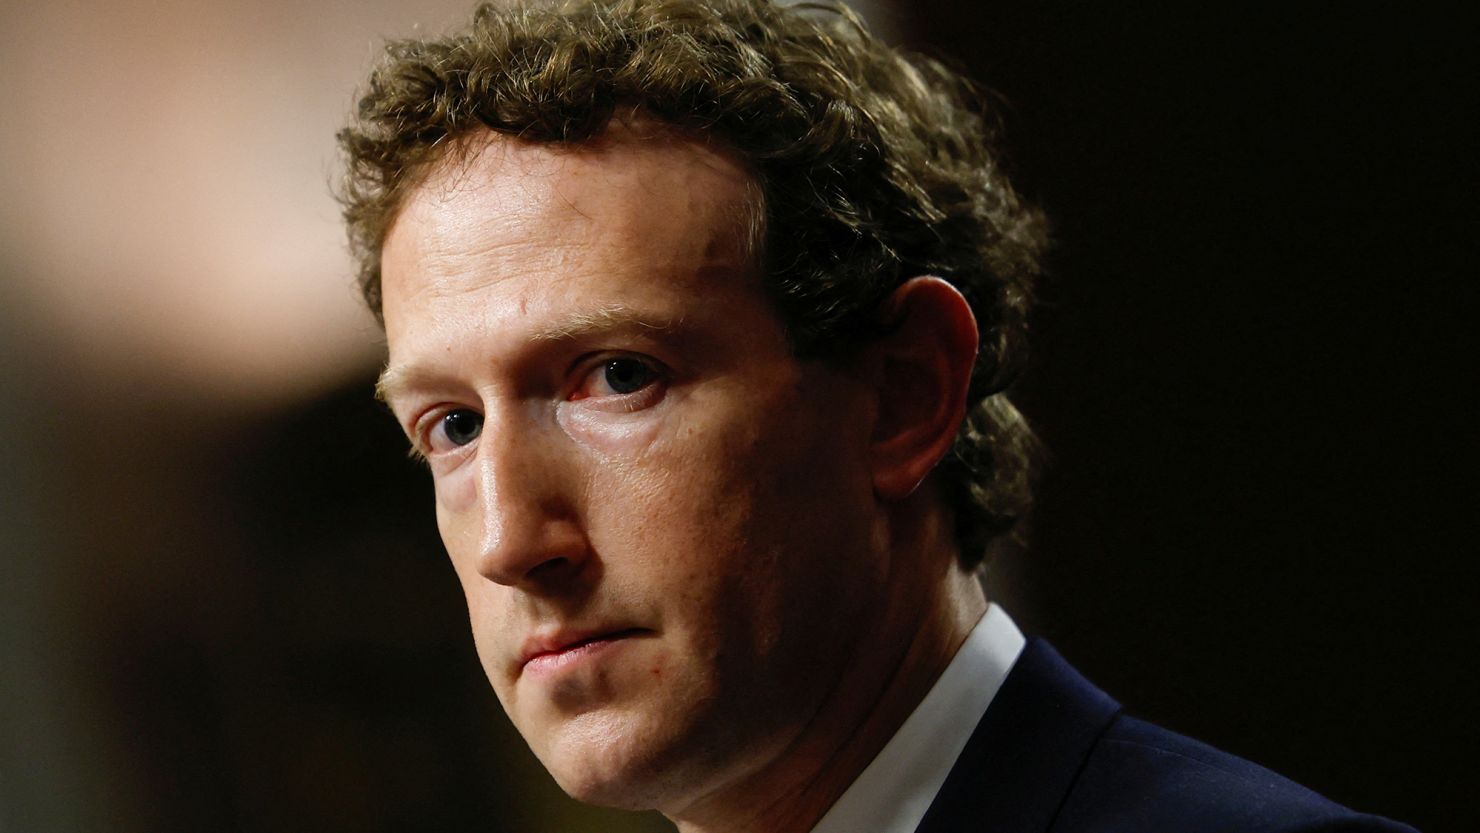 Meta's CEO Mark Zuckerberg attends a US Senate Judiciary Committee hearing on online child sexual exploitation in Washington DC in January 2024.